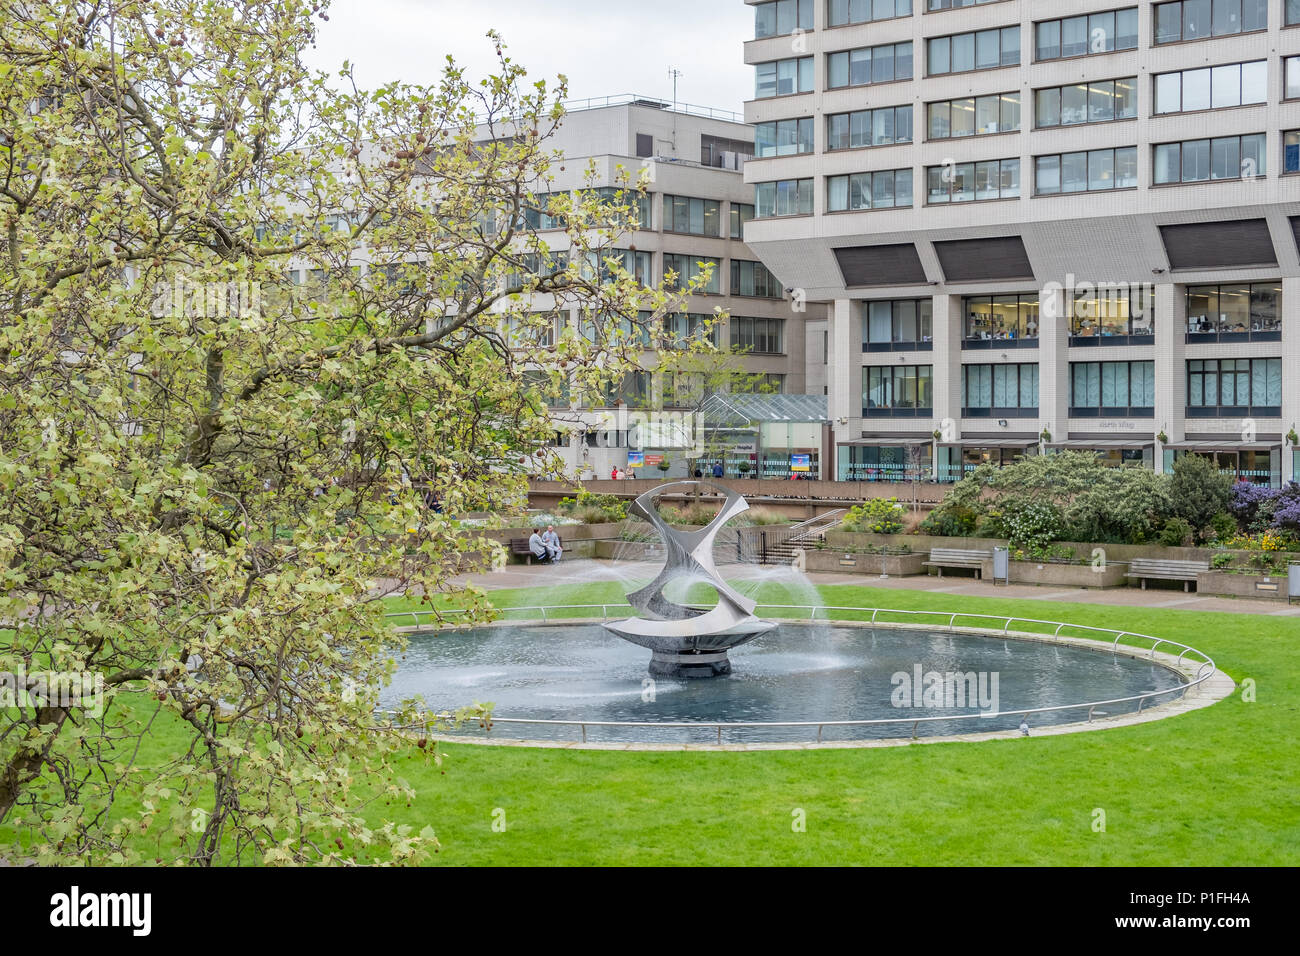 Revolving Torsion is a kinetic sculpture and fountain by artist Naum Gabo and is located on the grounds of St. Thomas Hospital in London. Stock Photo